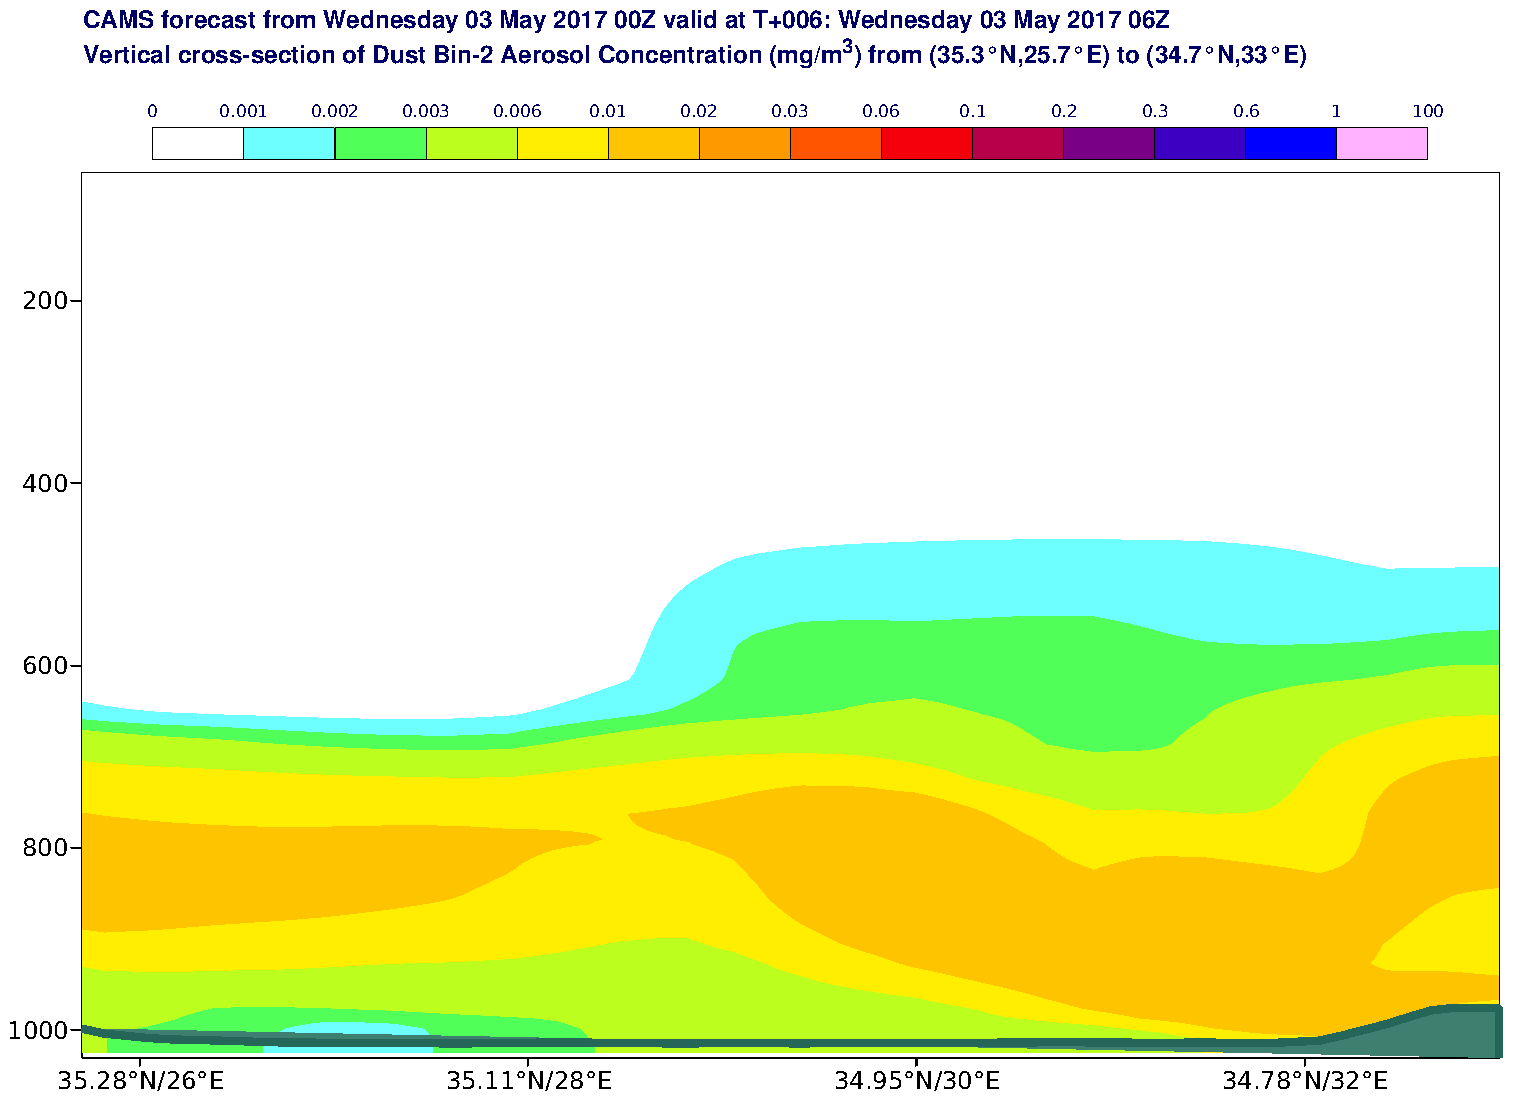 Vertical cross-section of Dust Bin-2 Aerosol Concentration (mg/m3) valid at T6 - 2017-05-03 06:00